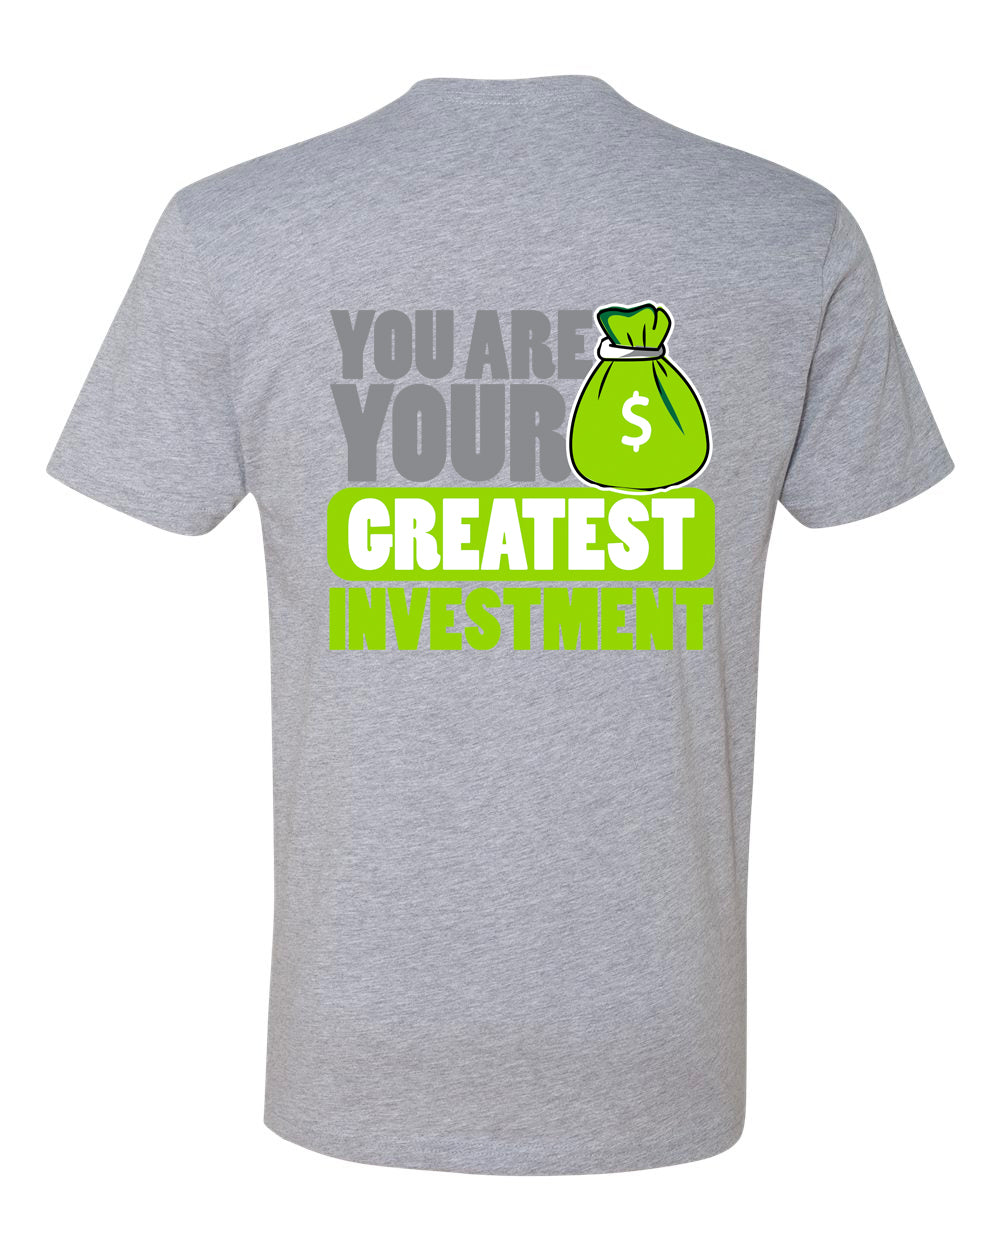 Greatest Investment Tee